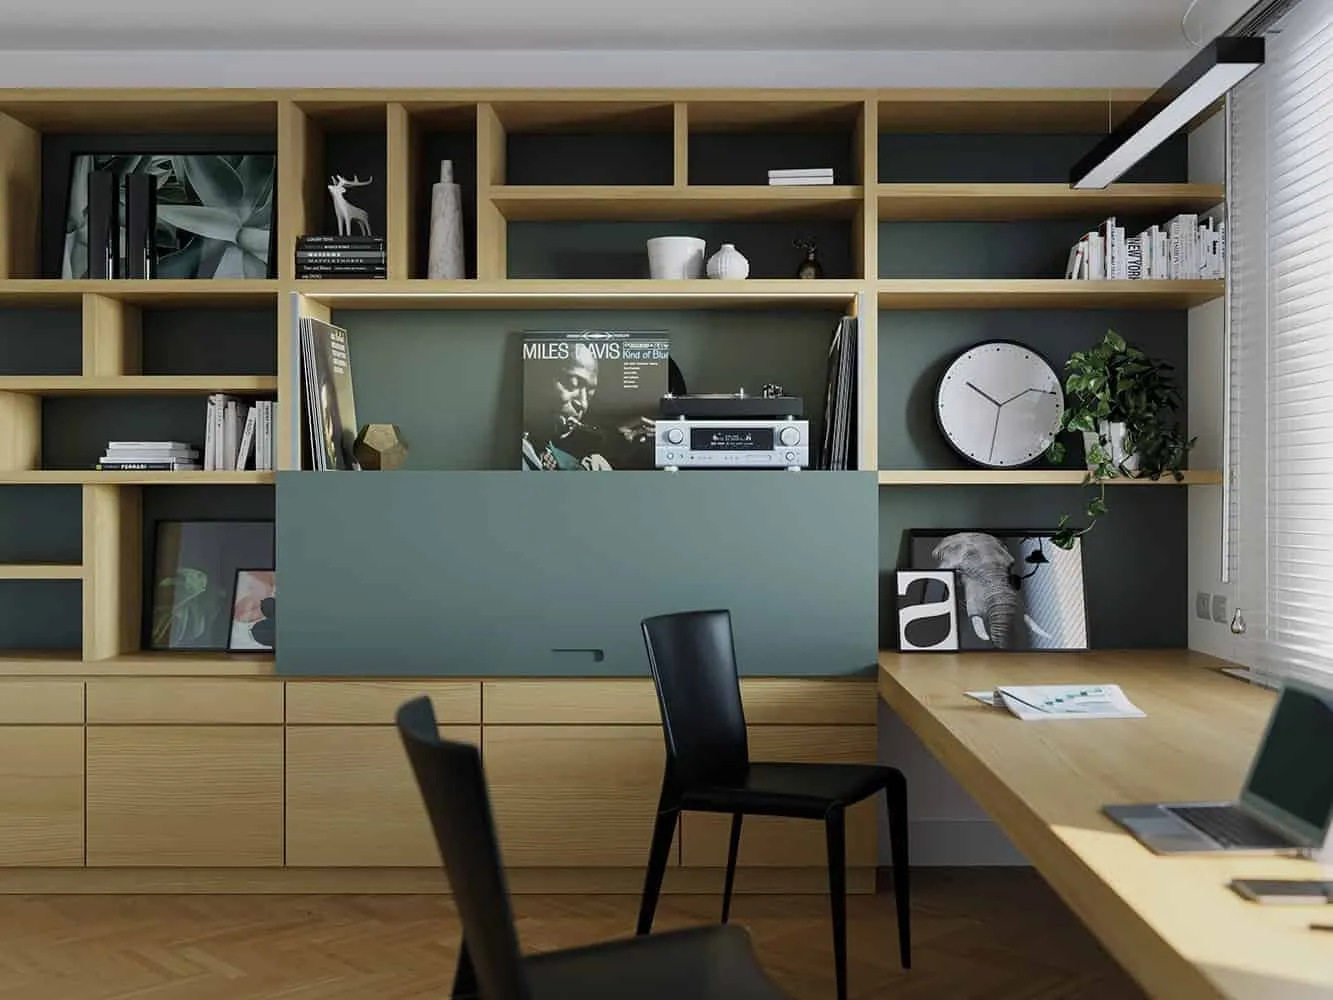 designer shelves and cabinets with black chairs and wooden desks